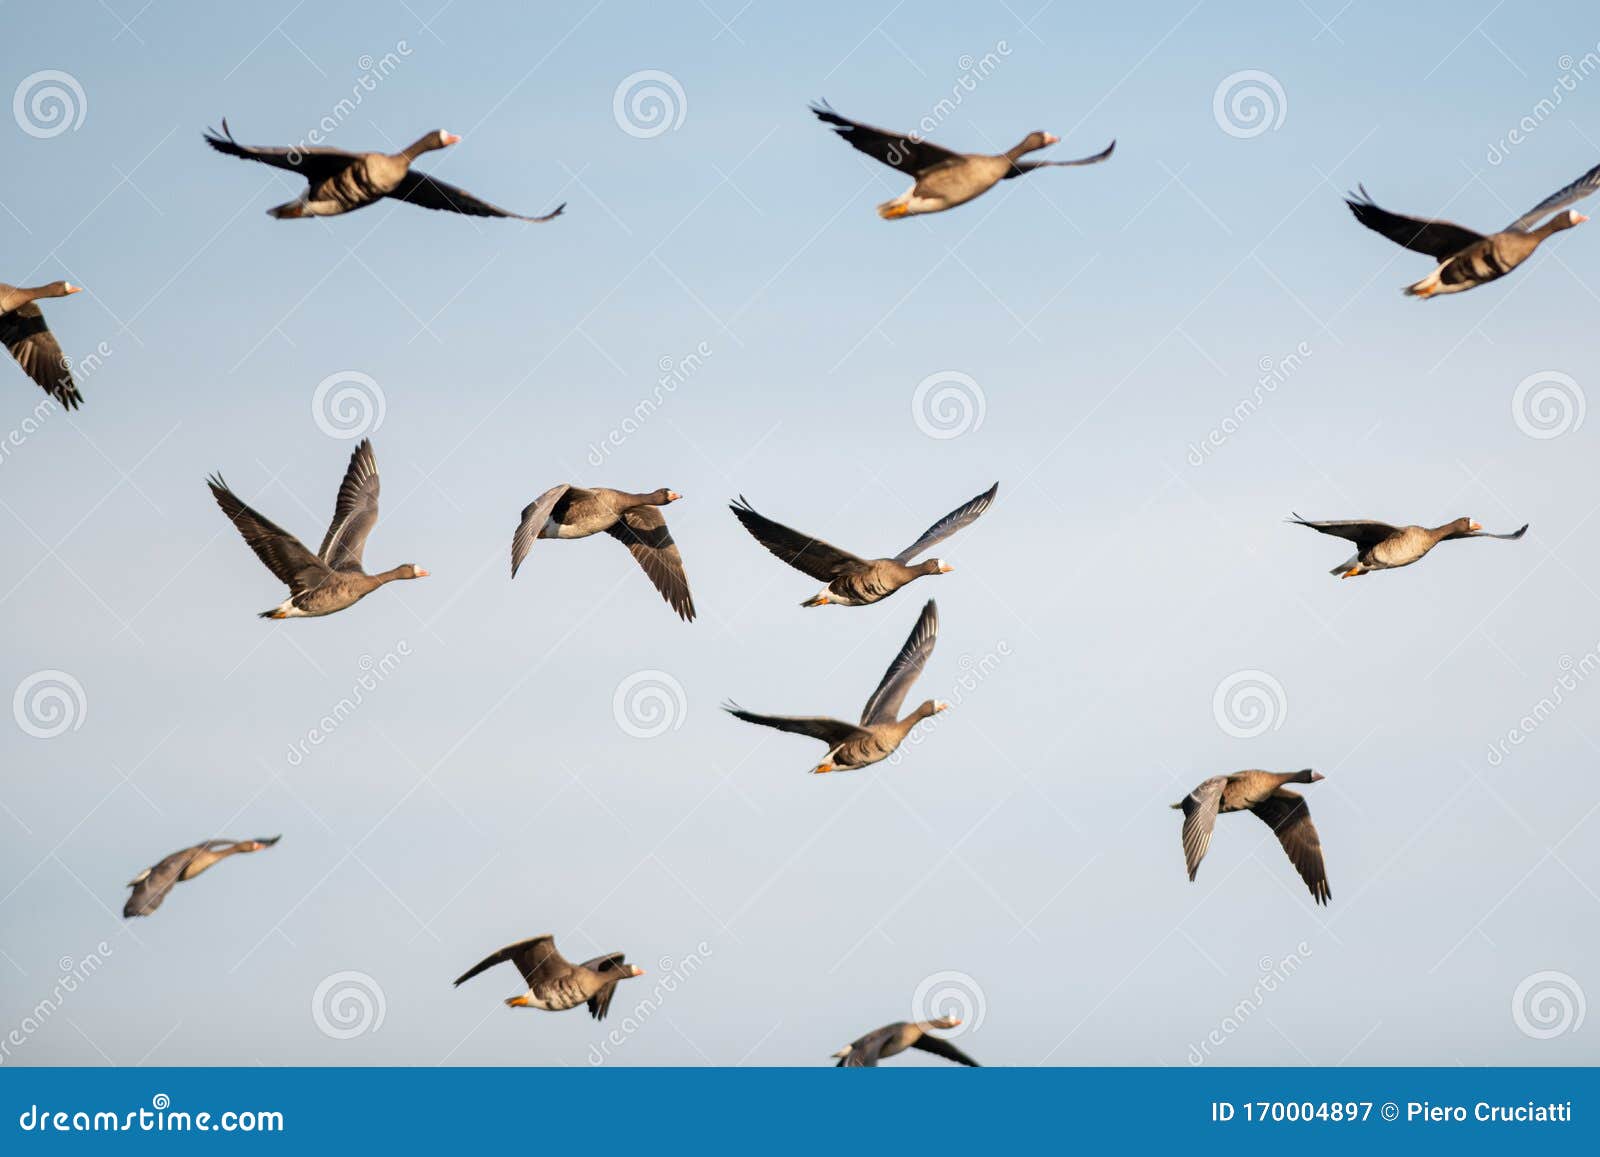 a flock of migrating geese flying in formation.